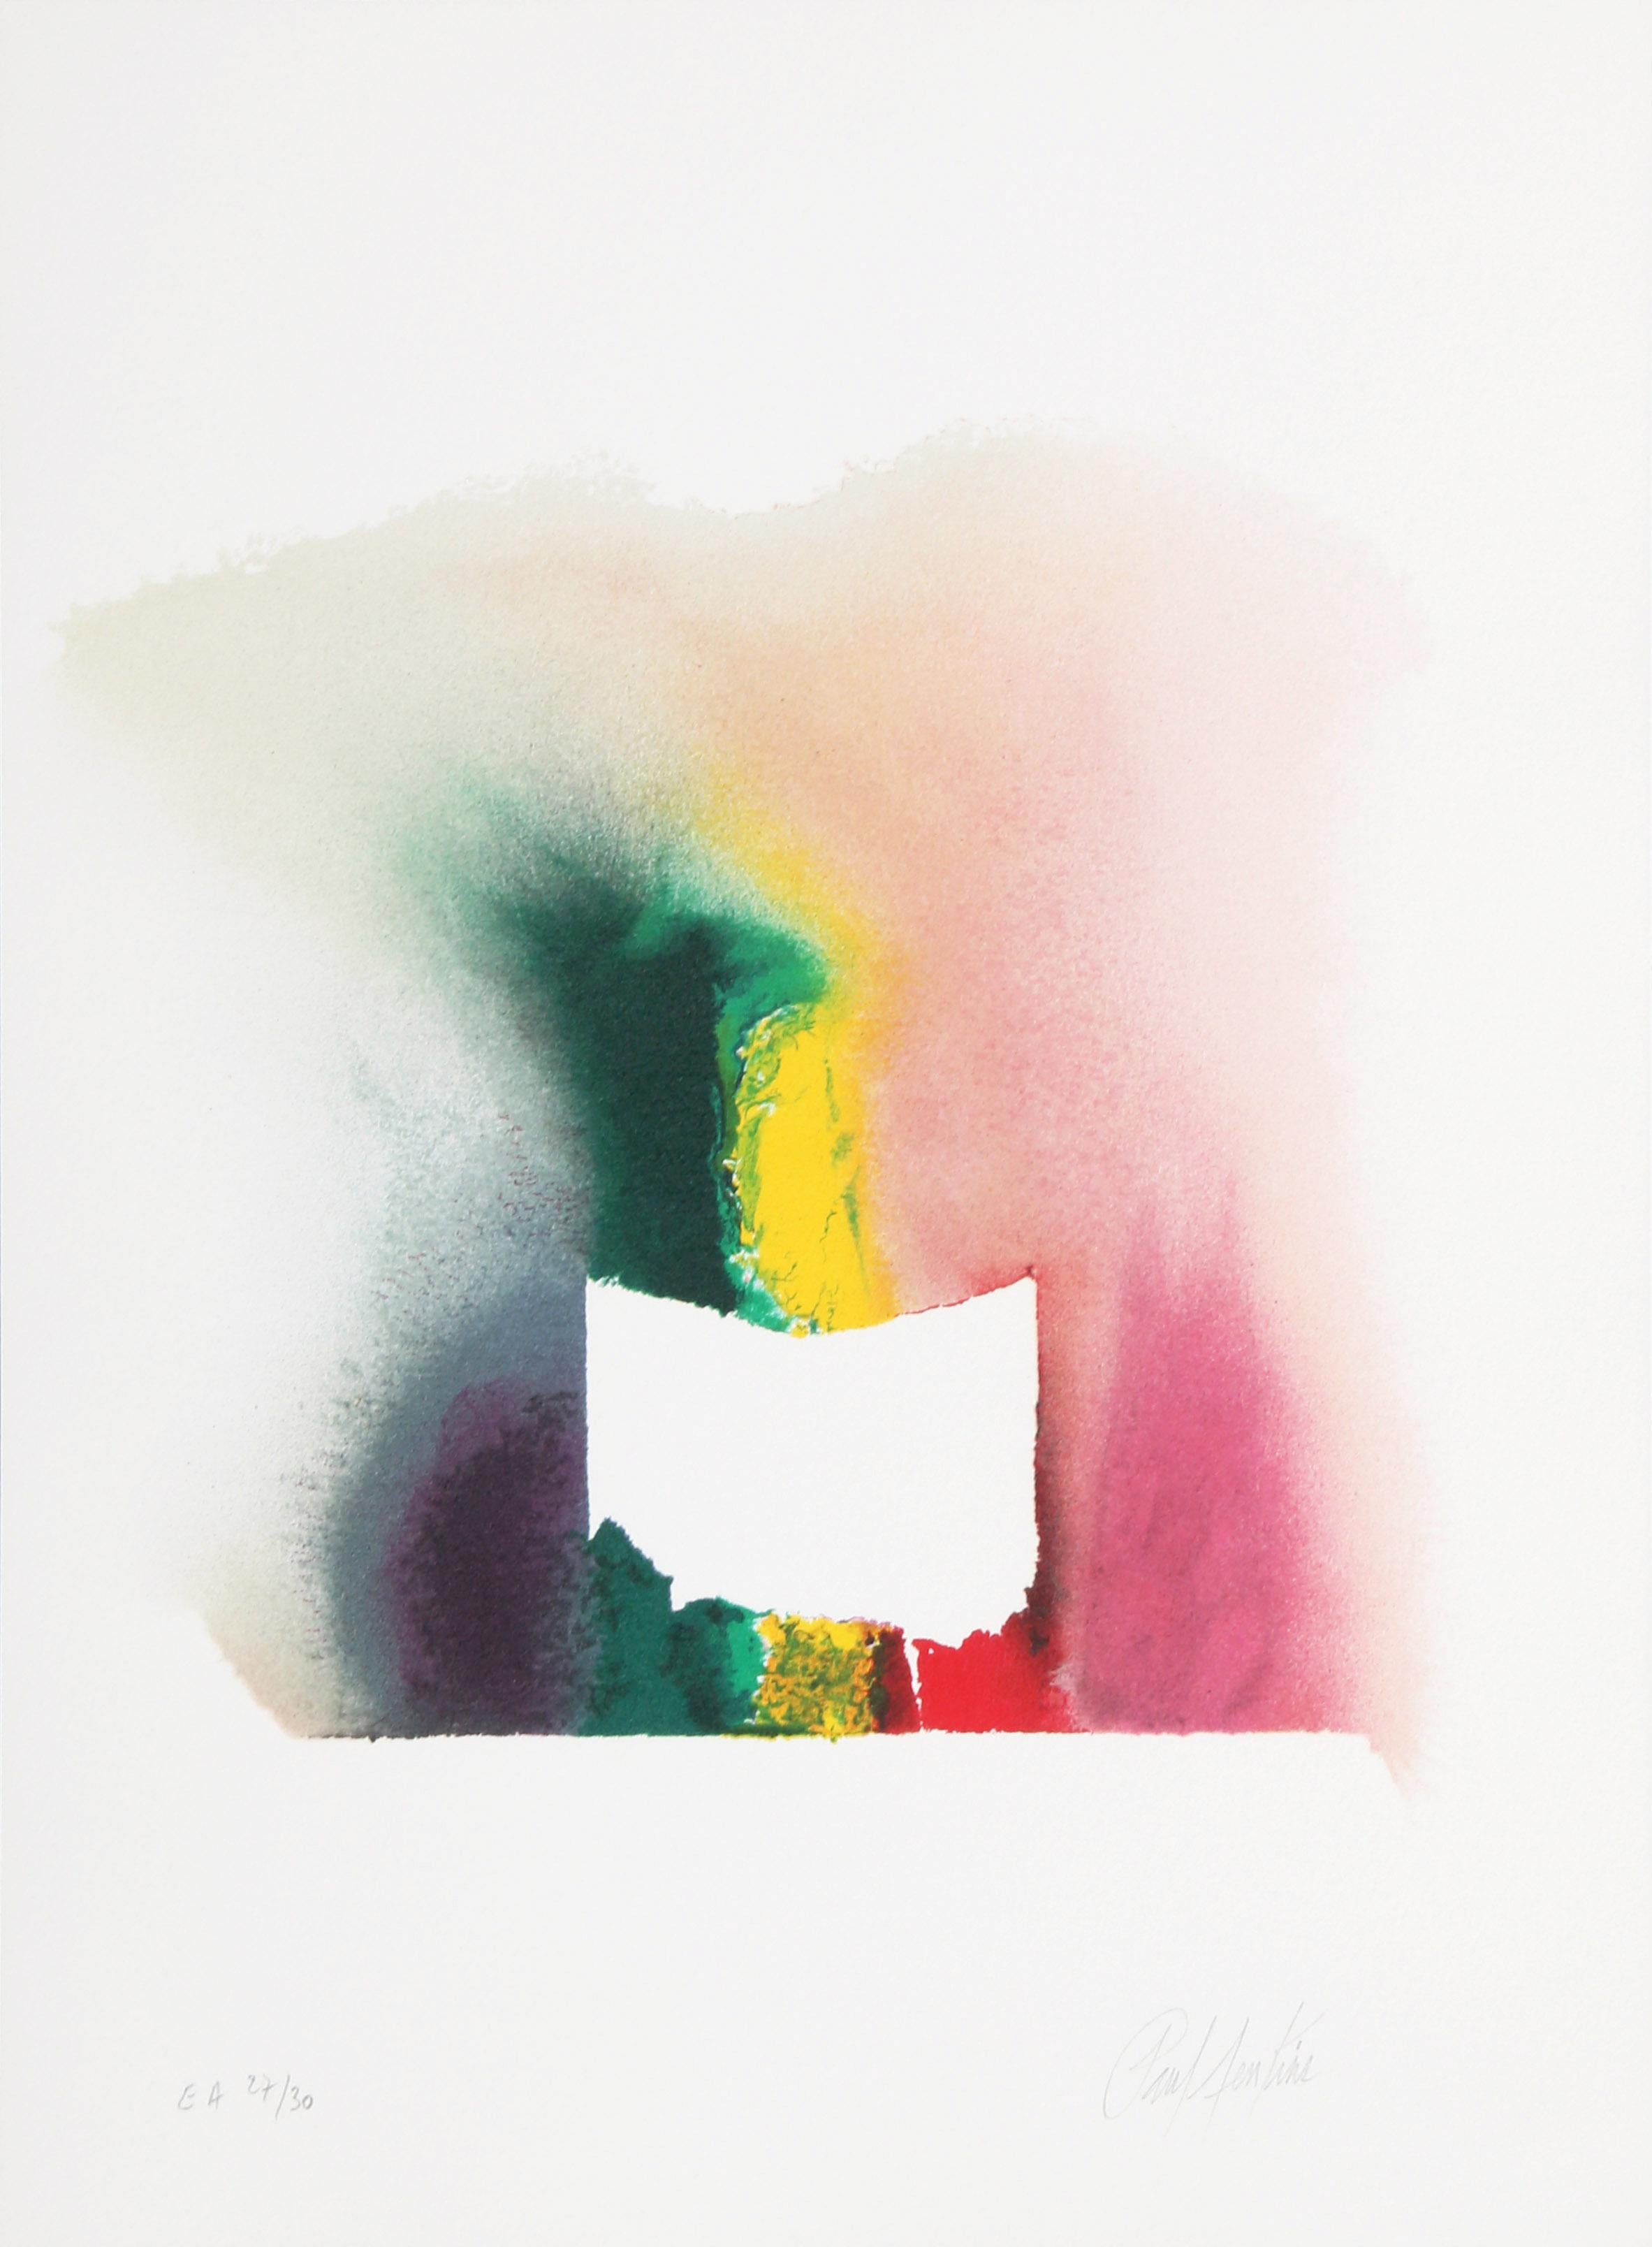 A lithograph from the portfolio "Le Couleur est un Chemin" or "The Color is a Path", a collection by Paul Jenkins that also includes several poems. This abstract piece is signed and numbered on the front of the print as well as on the colophon of